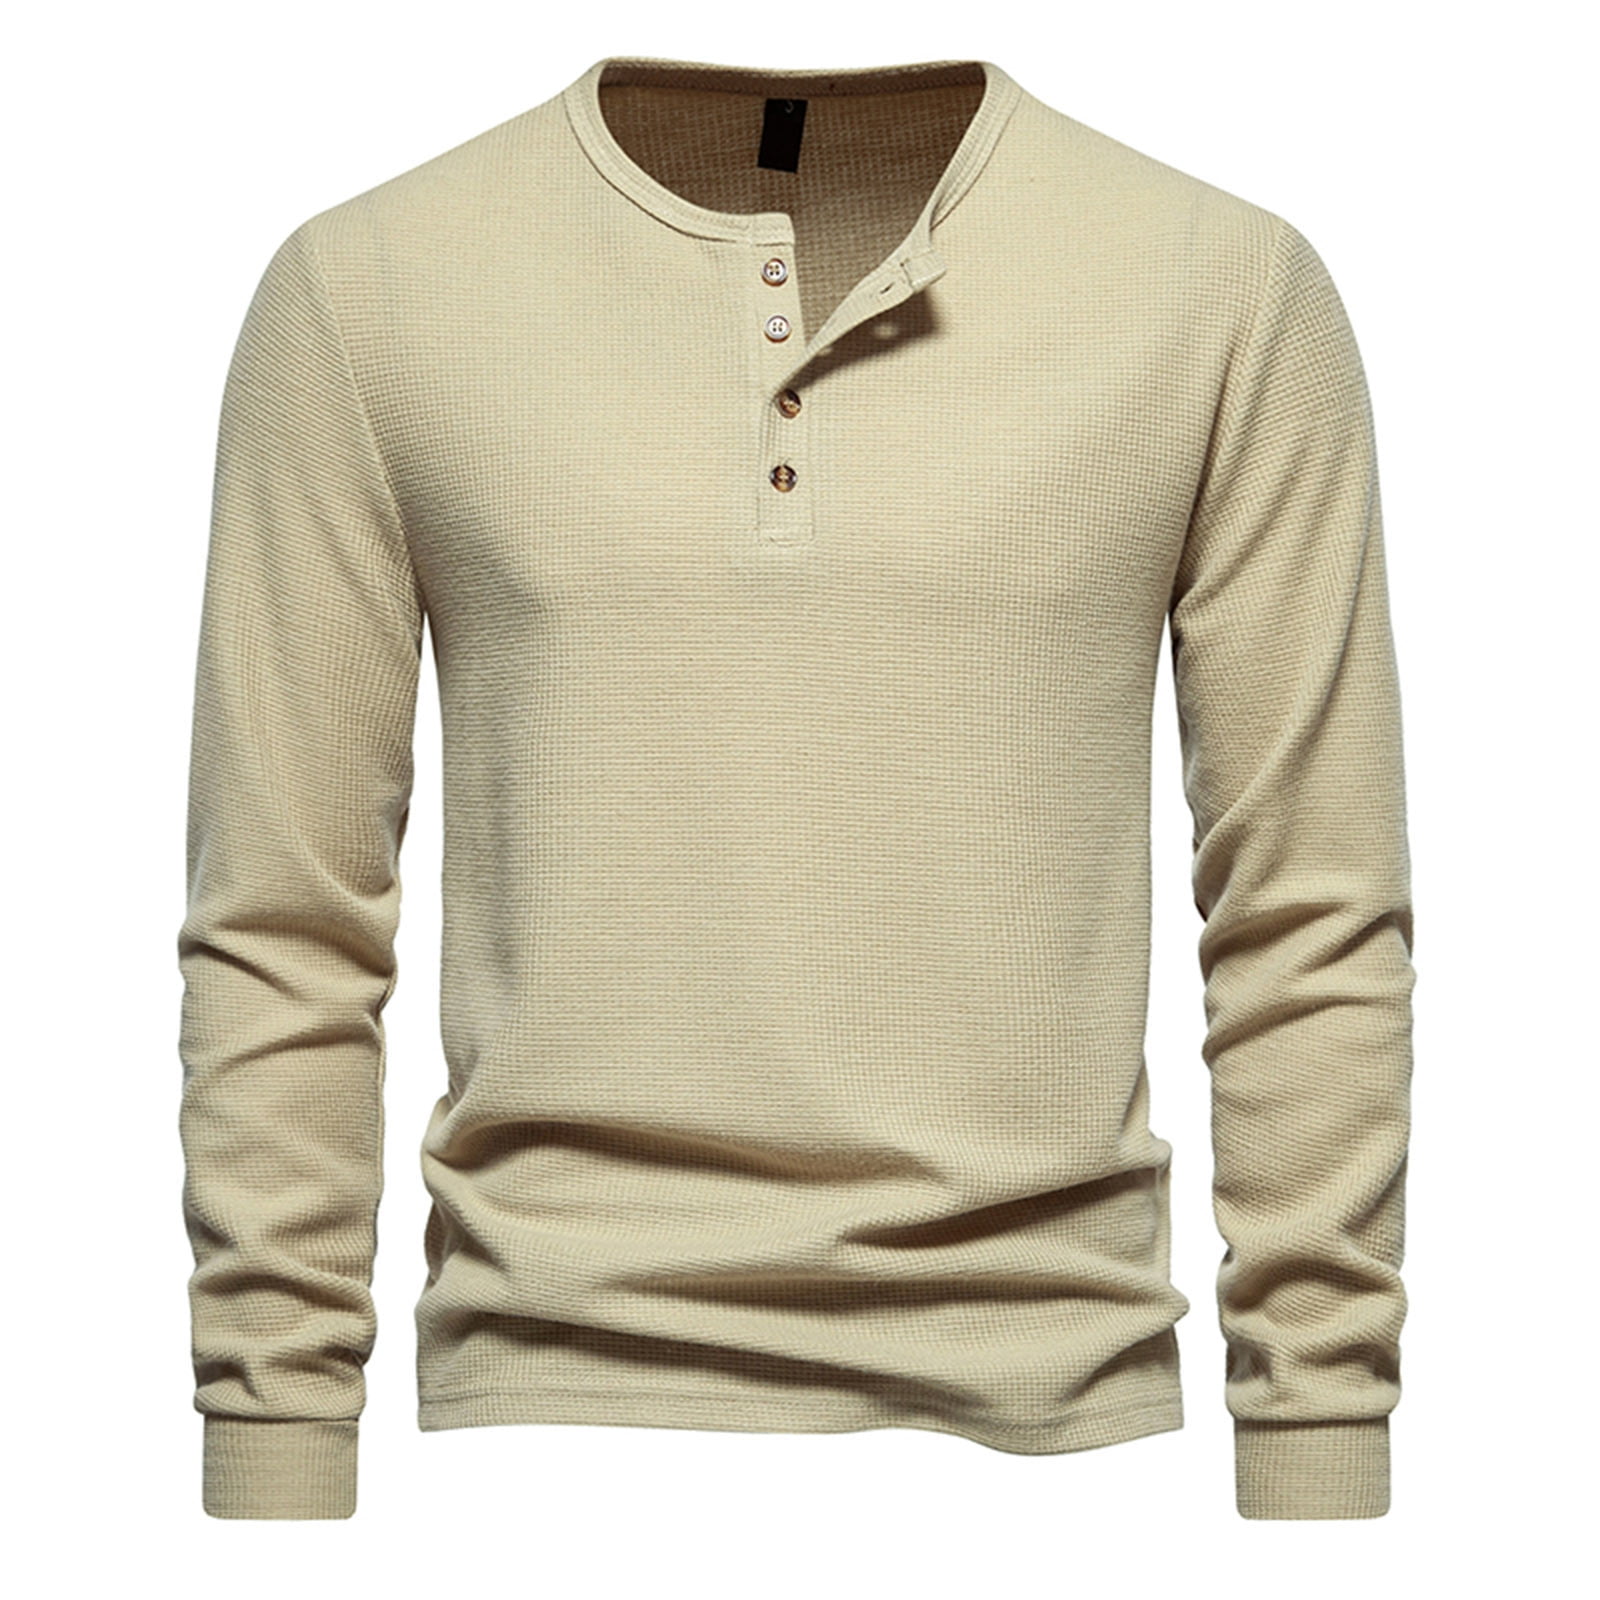 BYOIMUD Men's Casual Waffle Shirts Breathable Pullover with Buttons ...